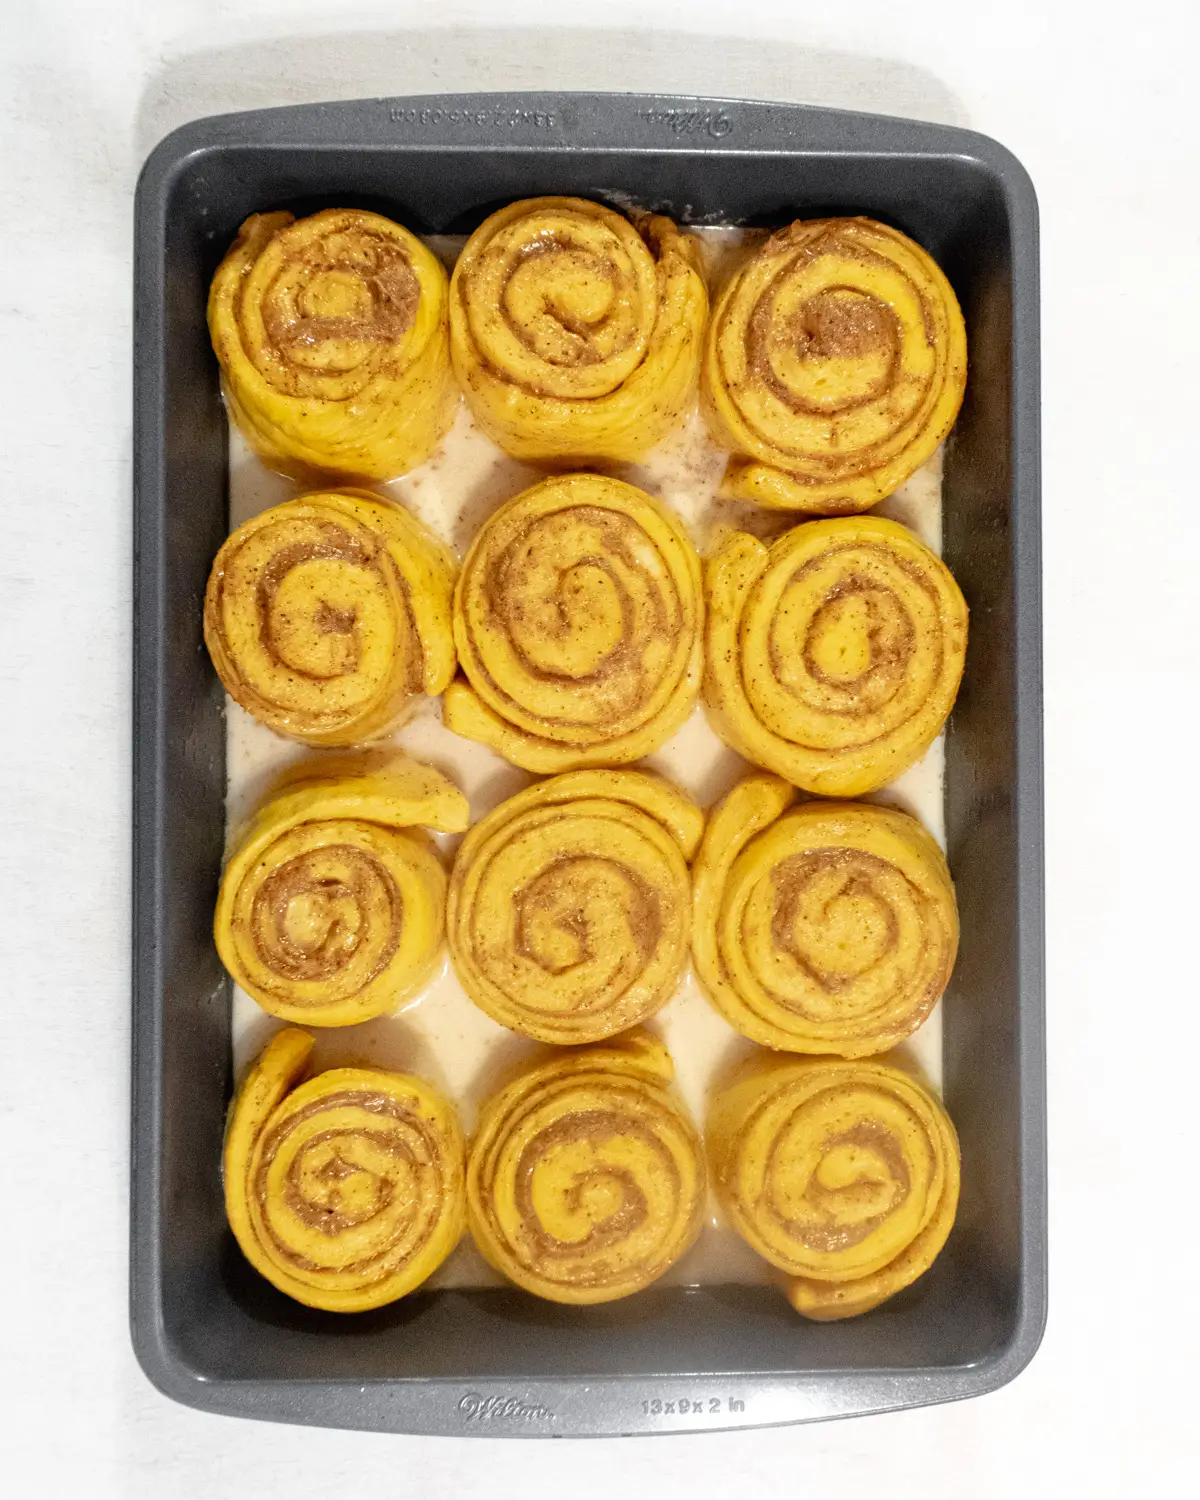 Proofed vegan pumpkin cinnamon rolls that have doubled in size.